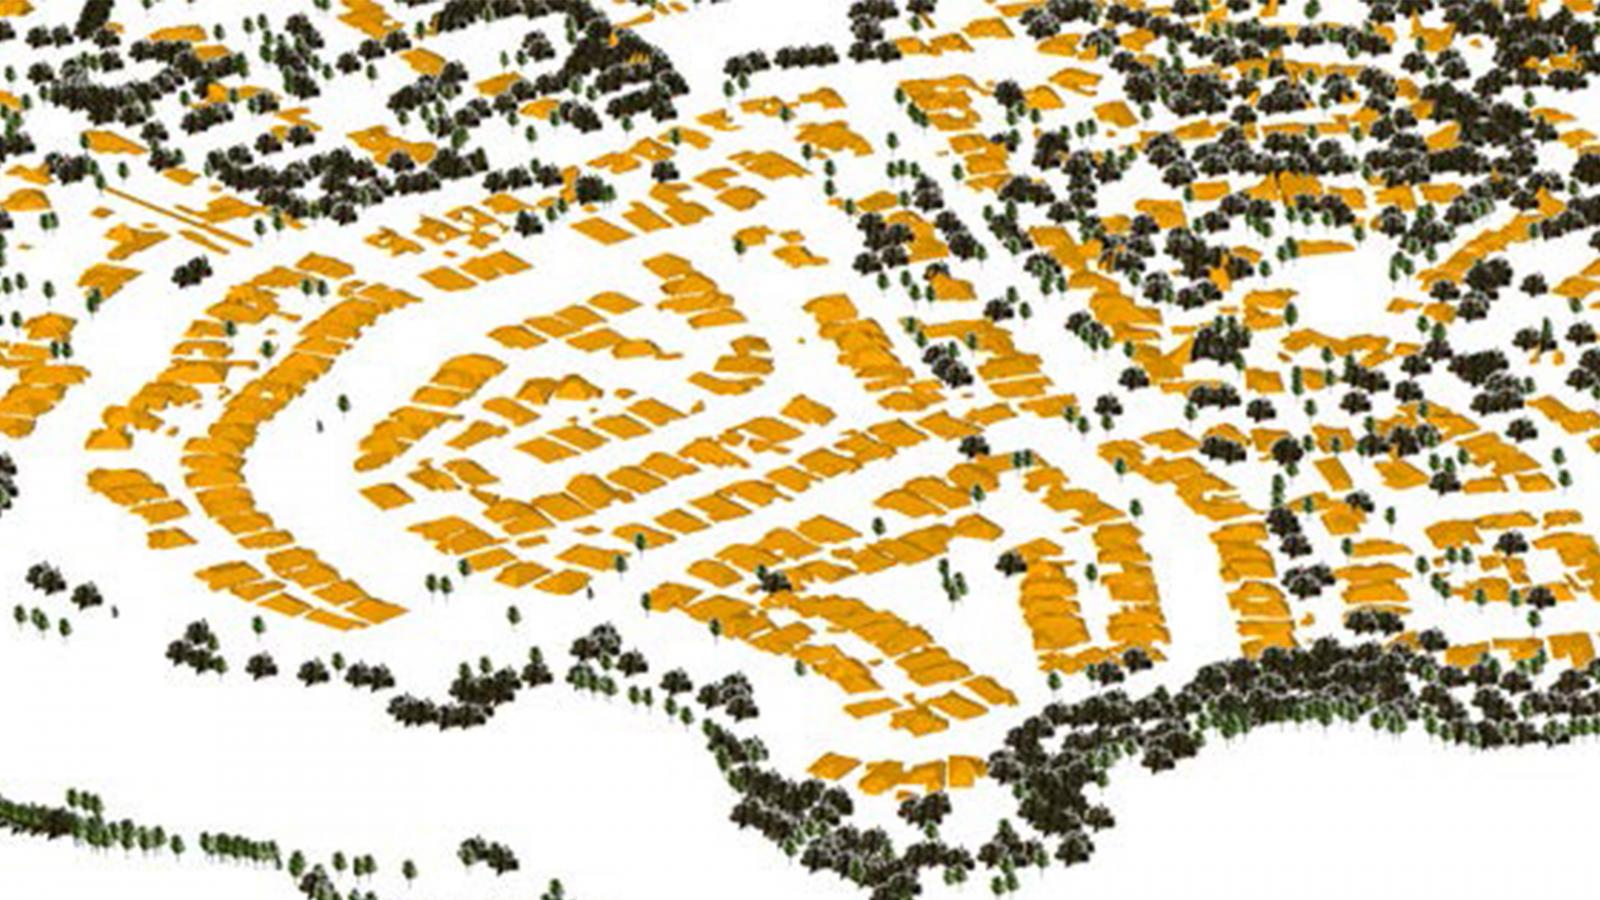 Aerial view of a residential area in Wollondilly with numerous orange-roofed houses arranged in a circular and grid-like pattern. The neighborhood is interspersed with green tree clusters, enhancing the urban tree canopy, and surrounded by more concentrated woodlands, creating a stark contrast with the white ground.